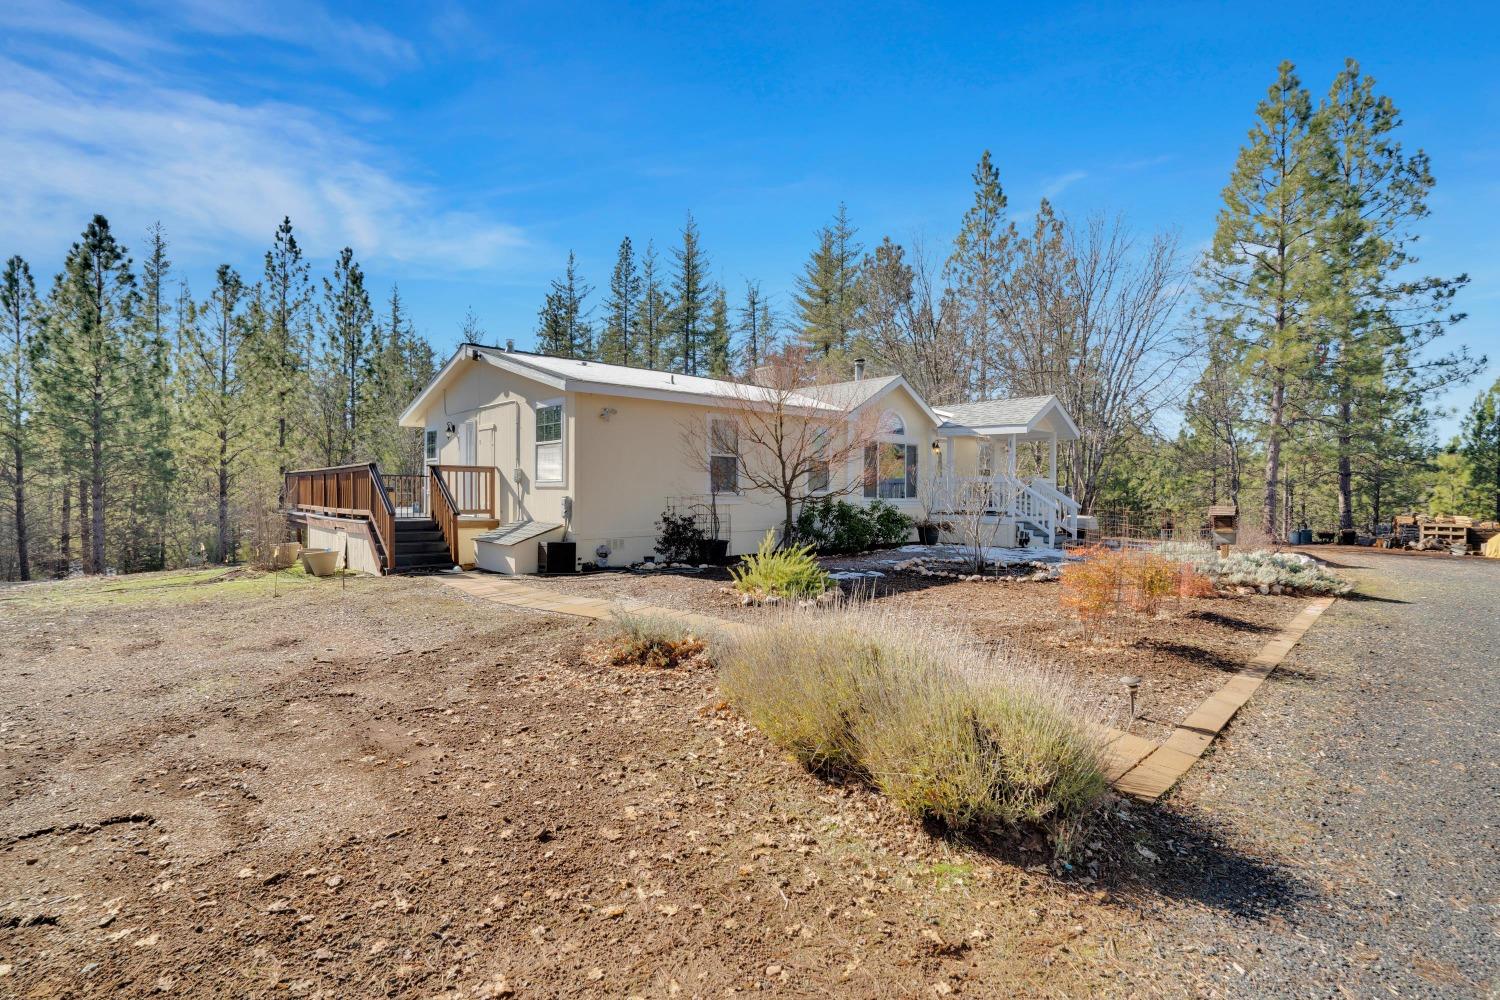 6916 Dogtown Road #B, Coulterville, CA 3bd/2bth/1350sf/5.29ac